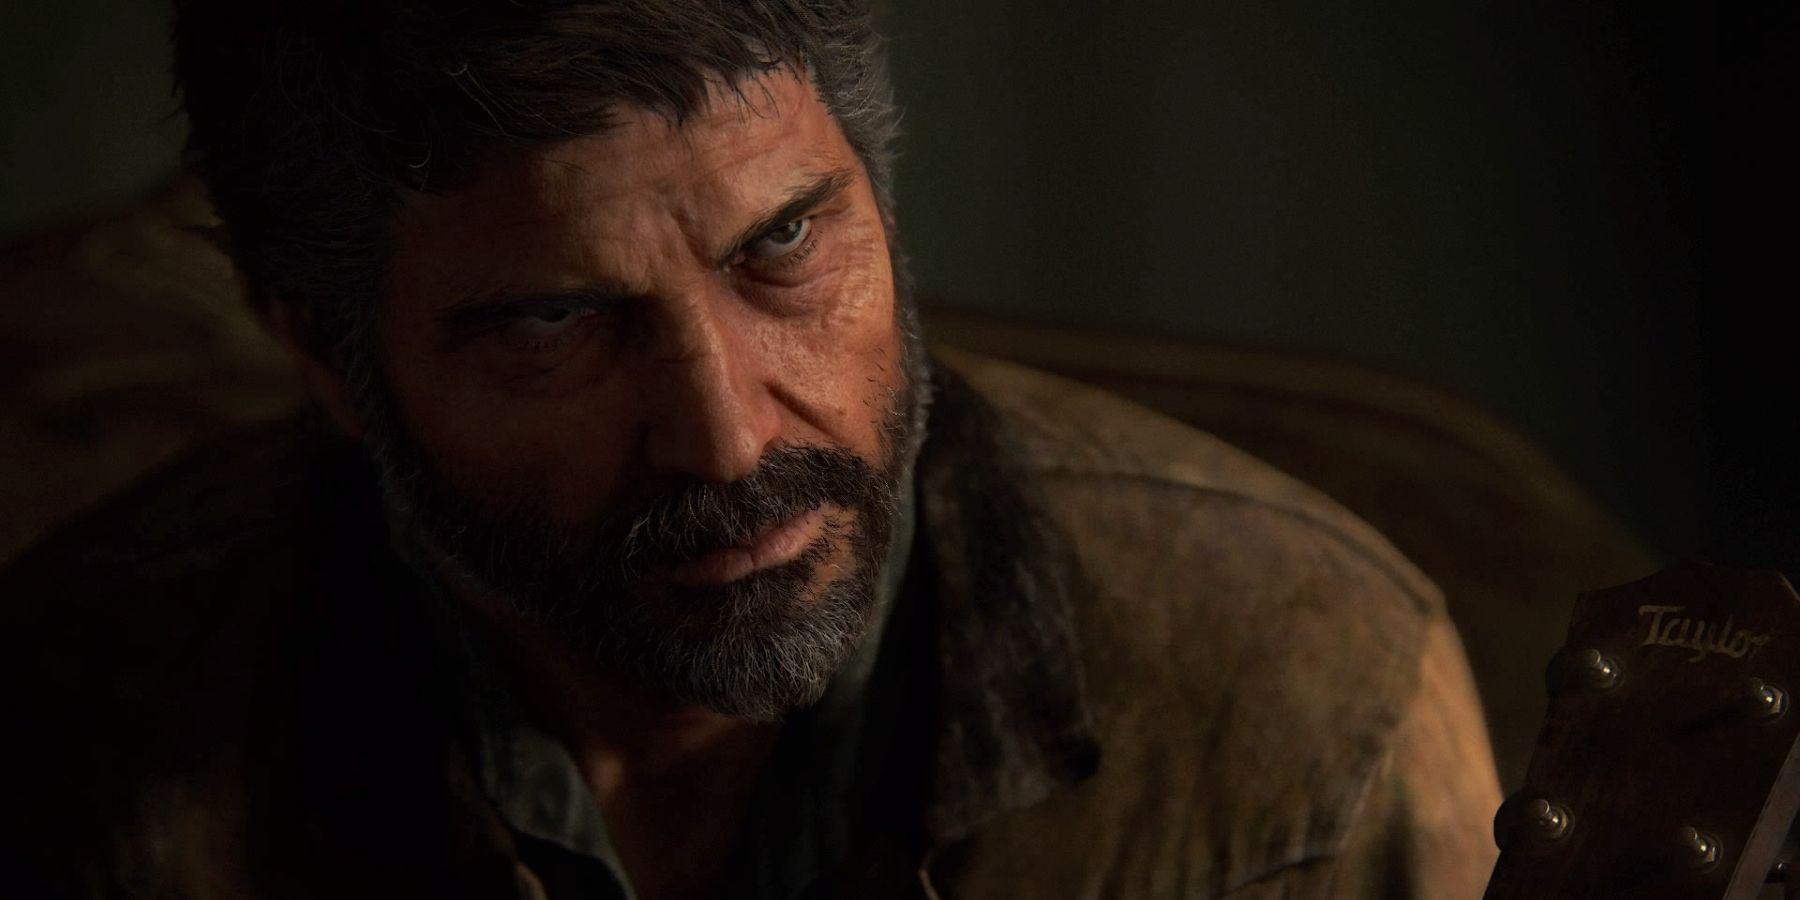 The Last of Us Director Explains Major Part II Connection